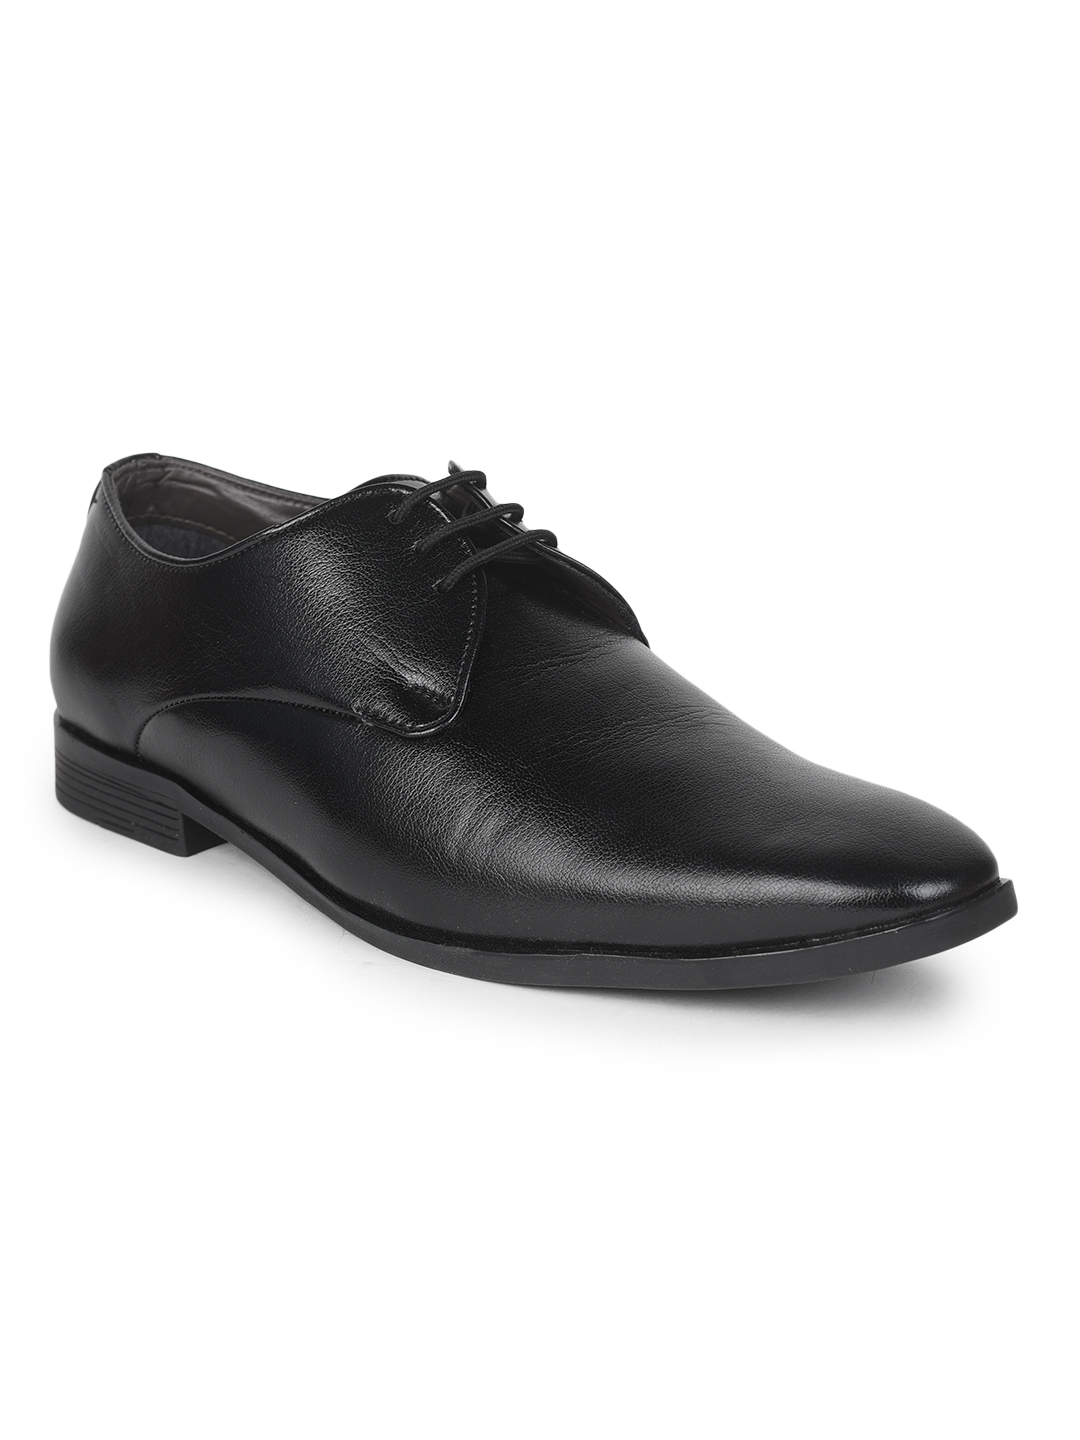 Liberty | Fortune by Liberty Black Formal Shoes SRG-301E For :- Men